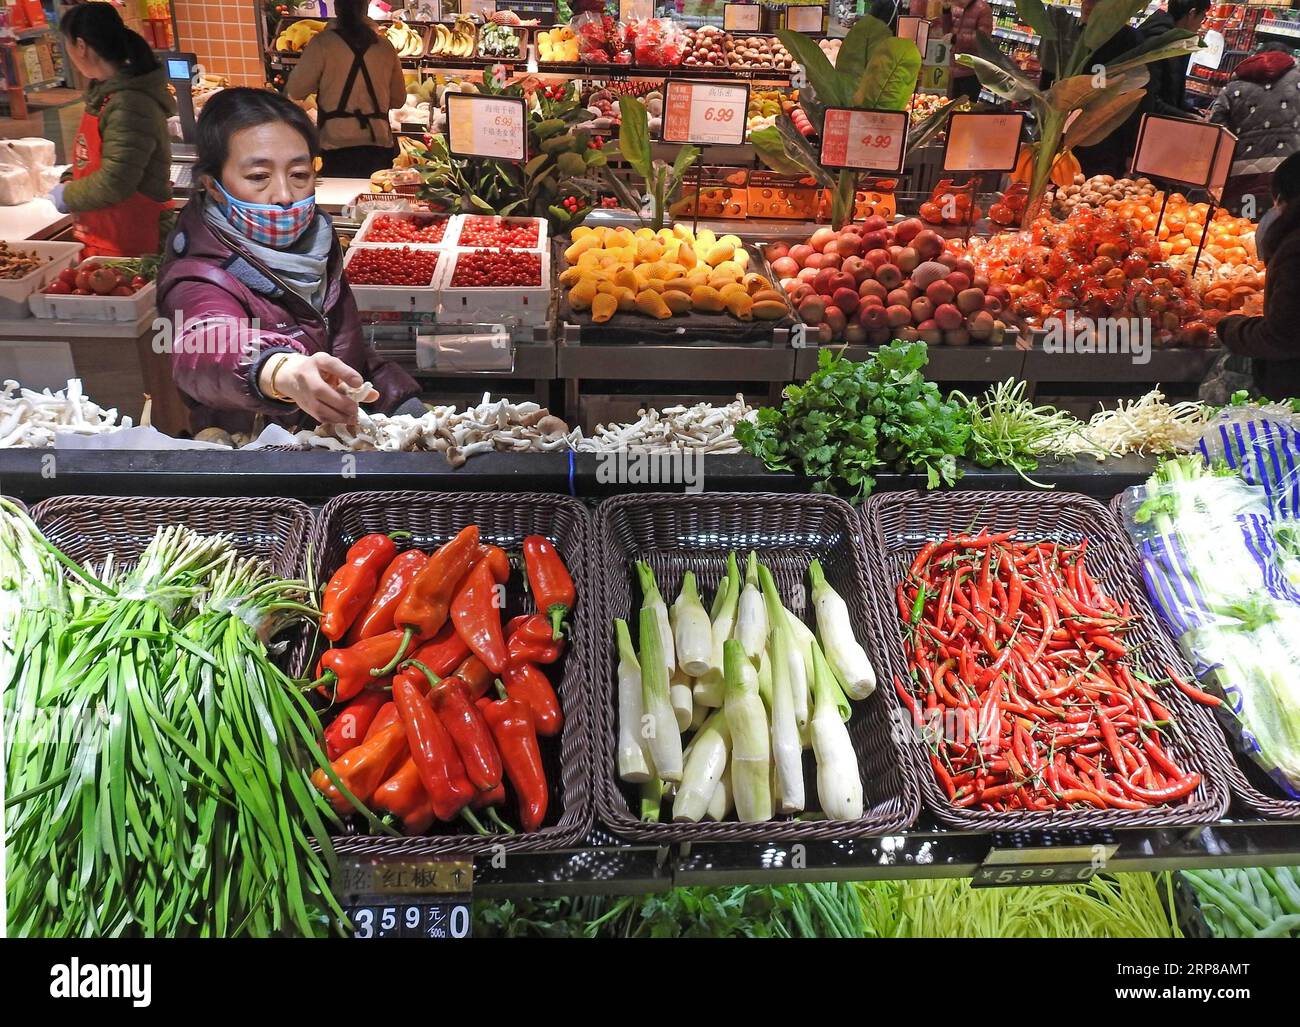 (190225) -- BEIJING, Feb. 25, 2019 -- Customers buy vegetables at a supermarket in Lianyungang, east China s Jiangsu Province, Jan.10, 2019. China has unveiled a guideline to enhance the accountability system of local governments to strengthen supervision over food safety. Food safety will be included in the performance assessment of the Party and government leading officials, according to the guideline released by the Central Committee of the Communist Party of China (CPC) and the State Council over the weekend. The guideline aims to promote local government s food safety work and improve peo Stock Photo